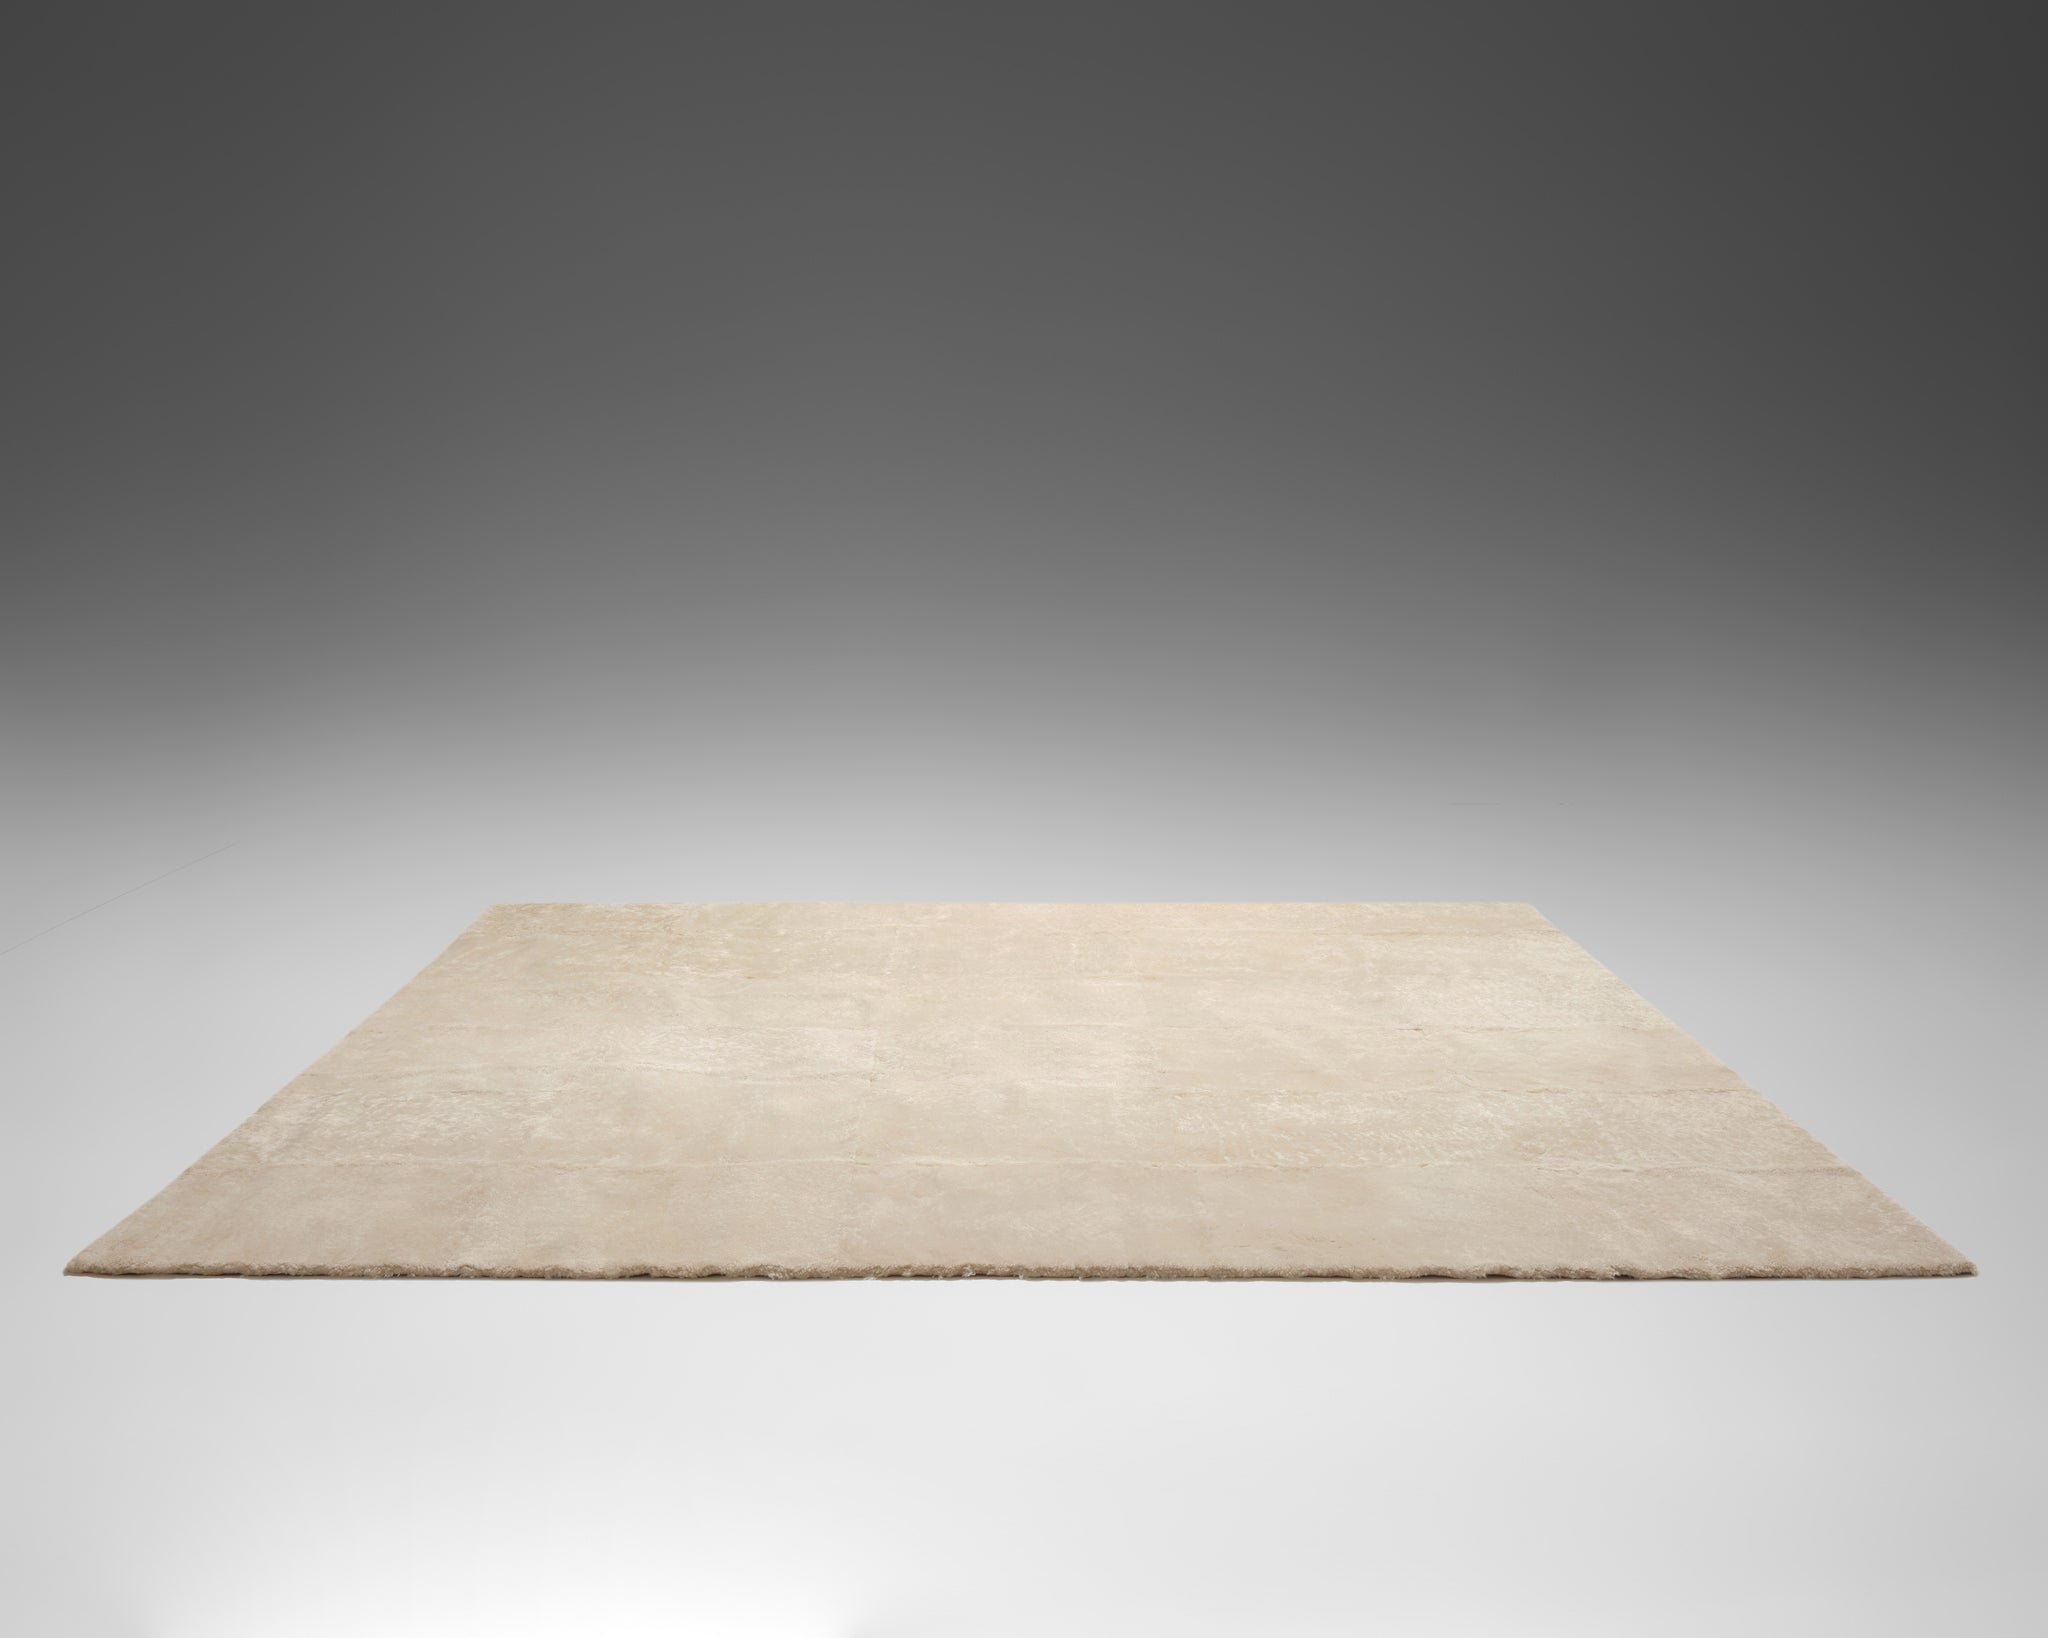 The Large Shearling Rug